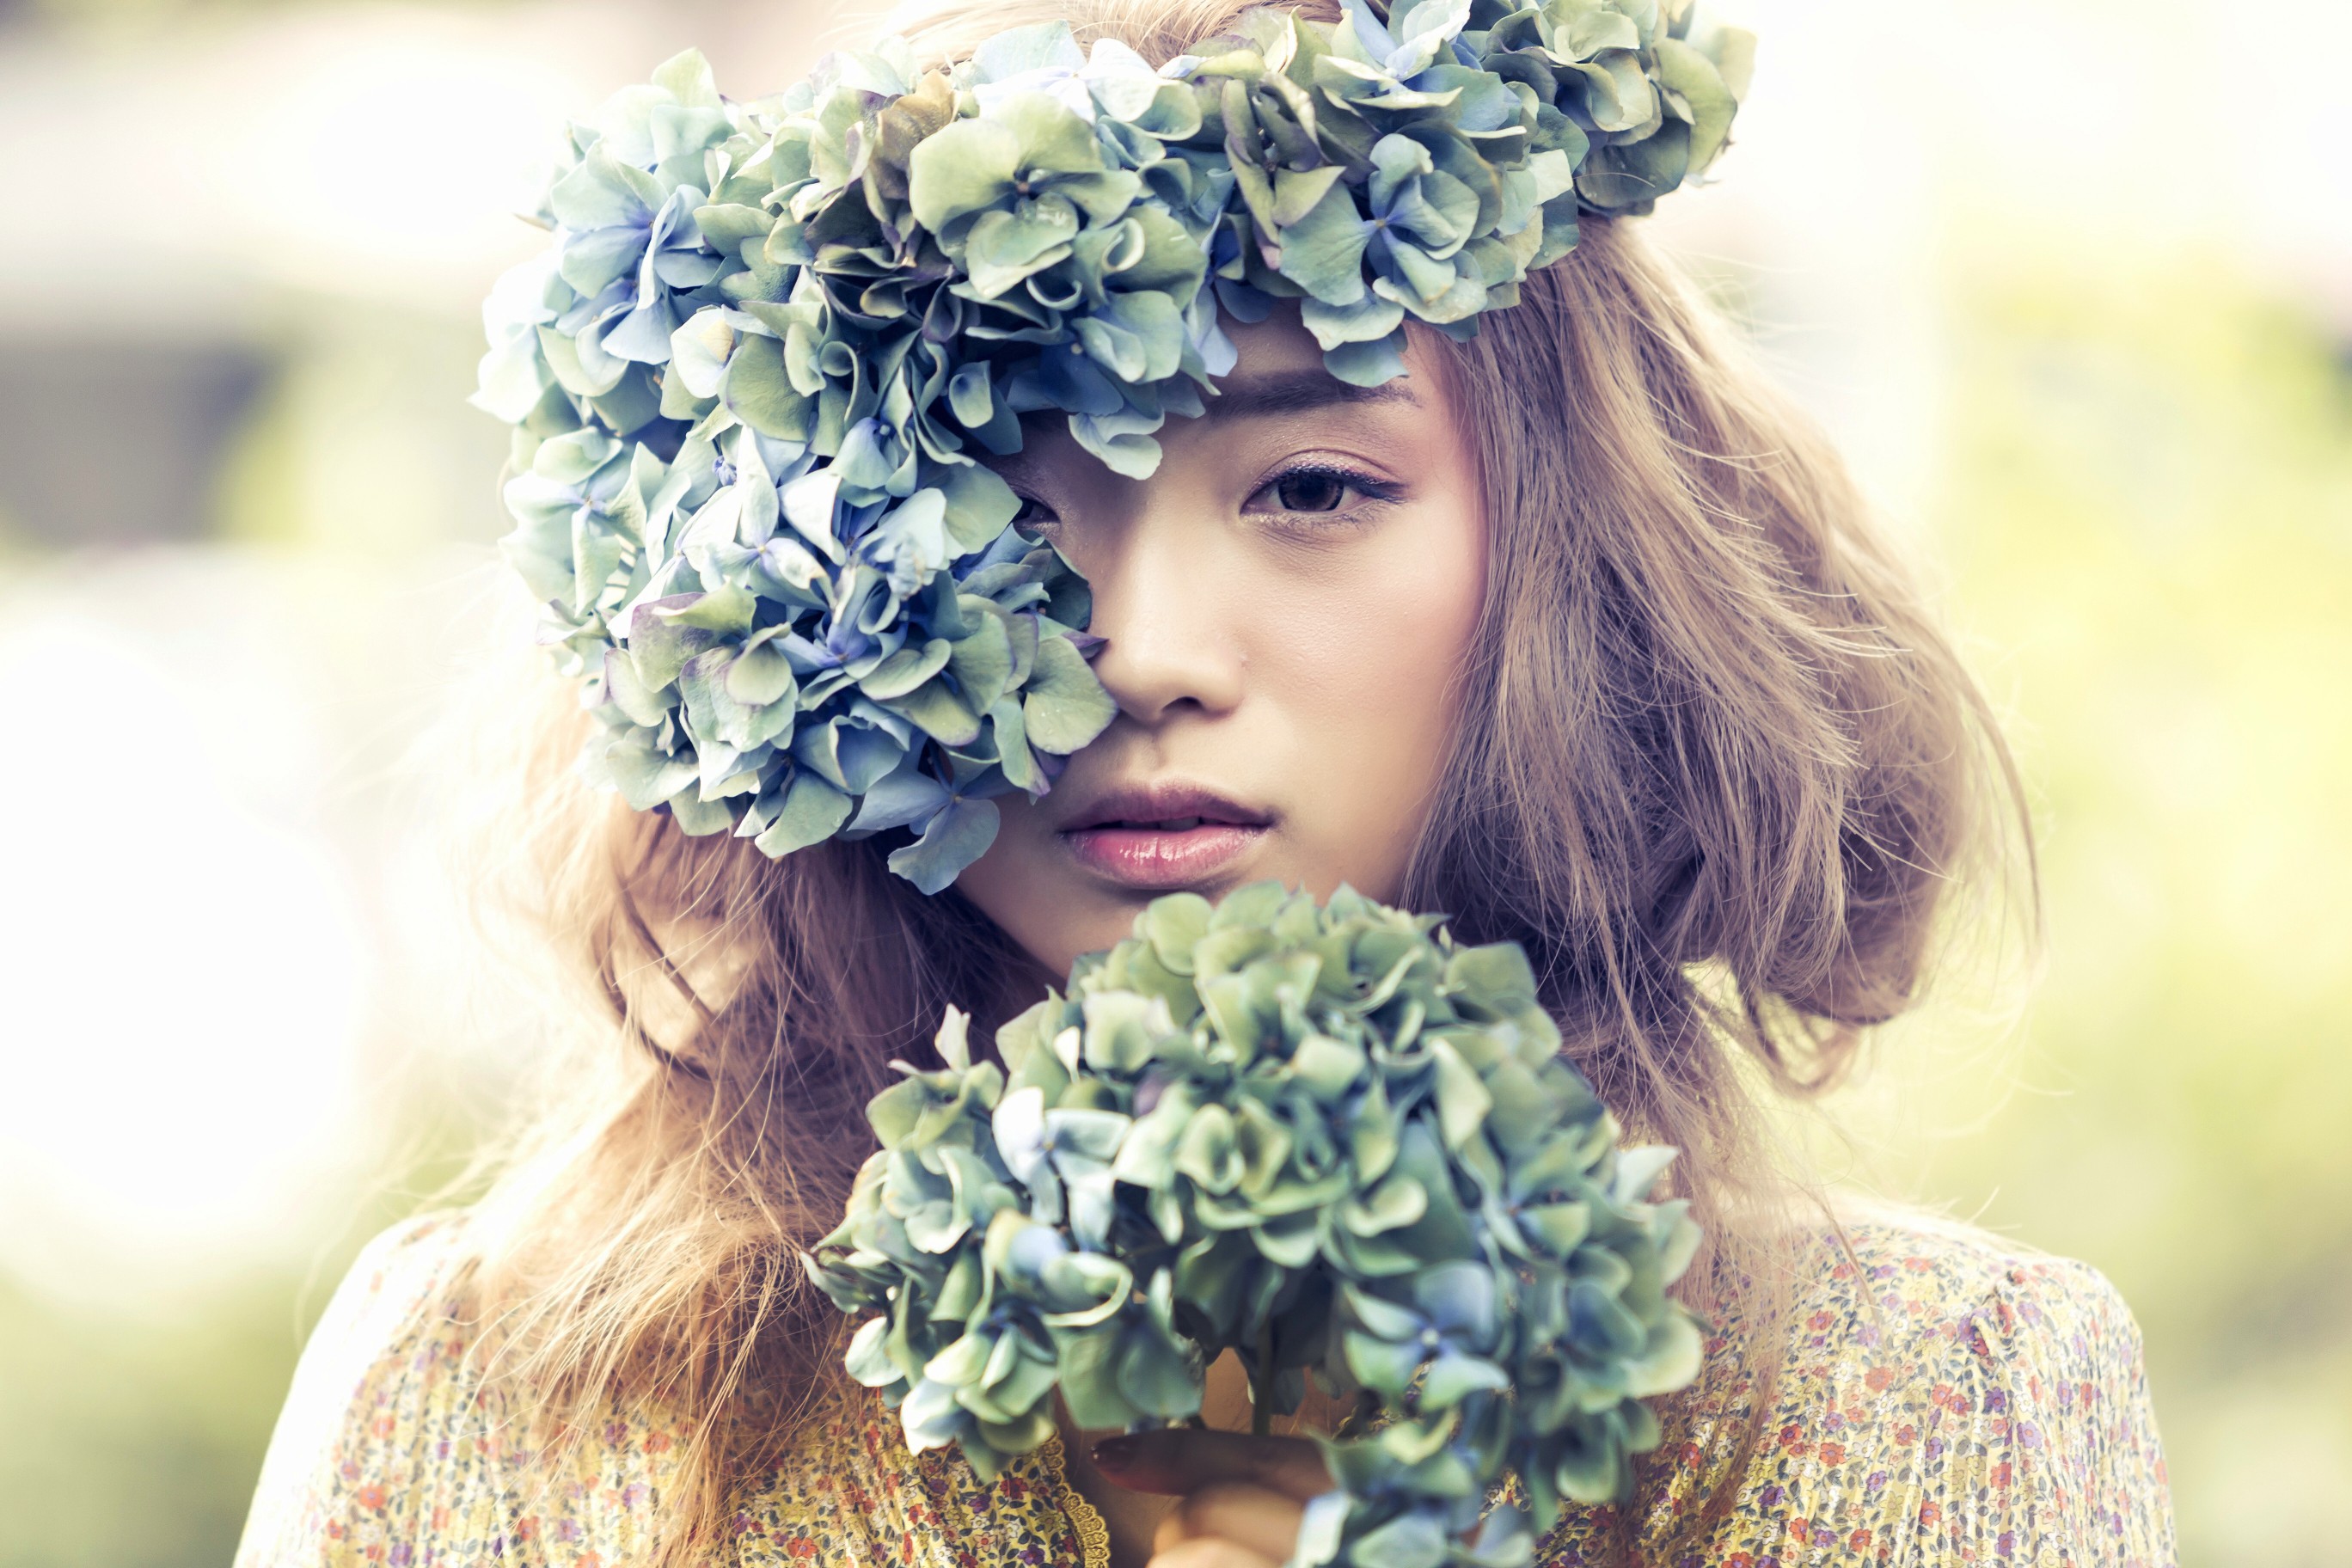 Wallpaper, women, model, blonde, looking at viewer, Asian, dress, green, blue, fashion, hair, wreaths, spring, clothing, flower, plant, girl, beauty, eye, woman, bride, hairstyle, portrait photography, photo shoot 2736x1824